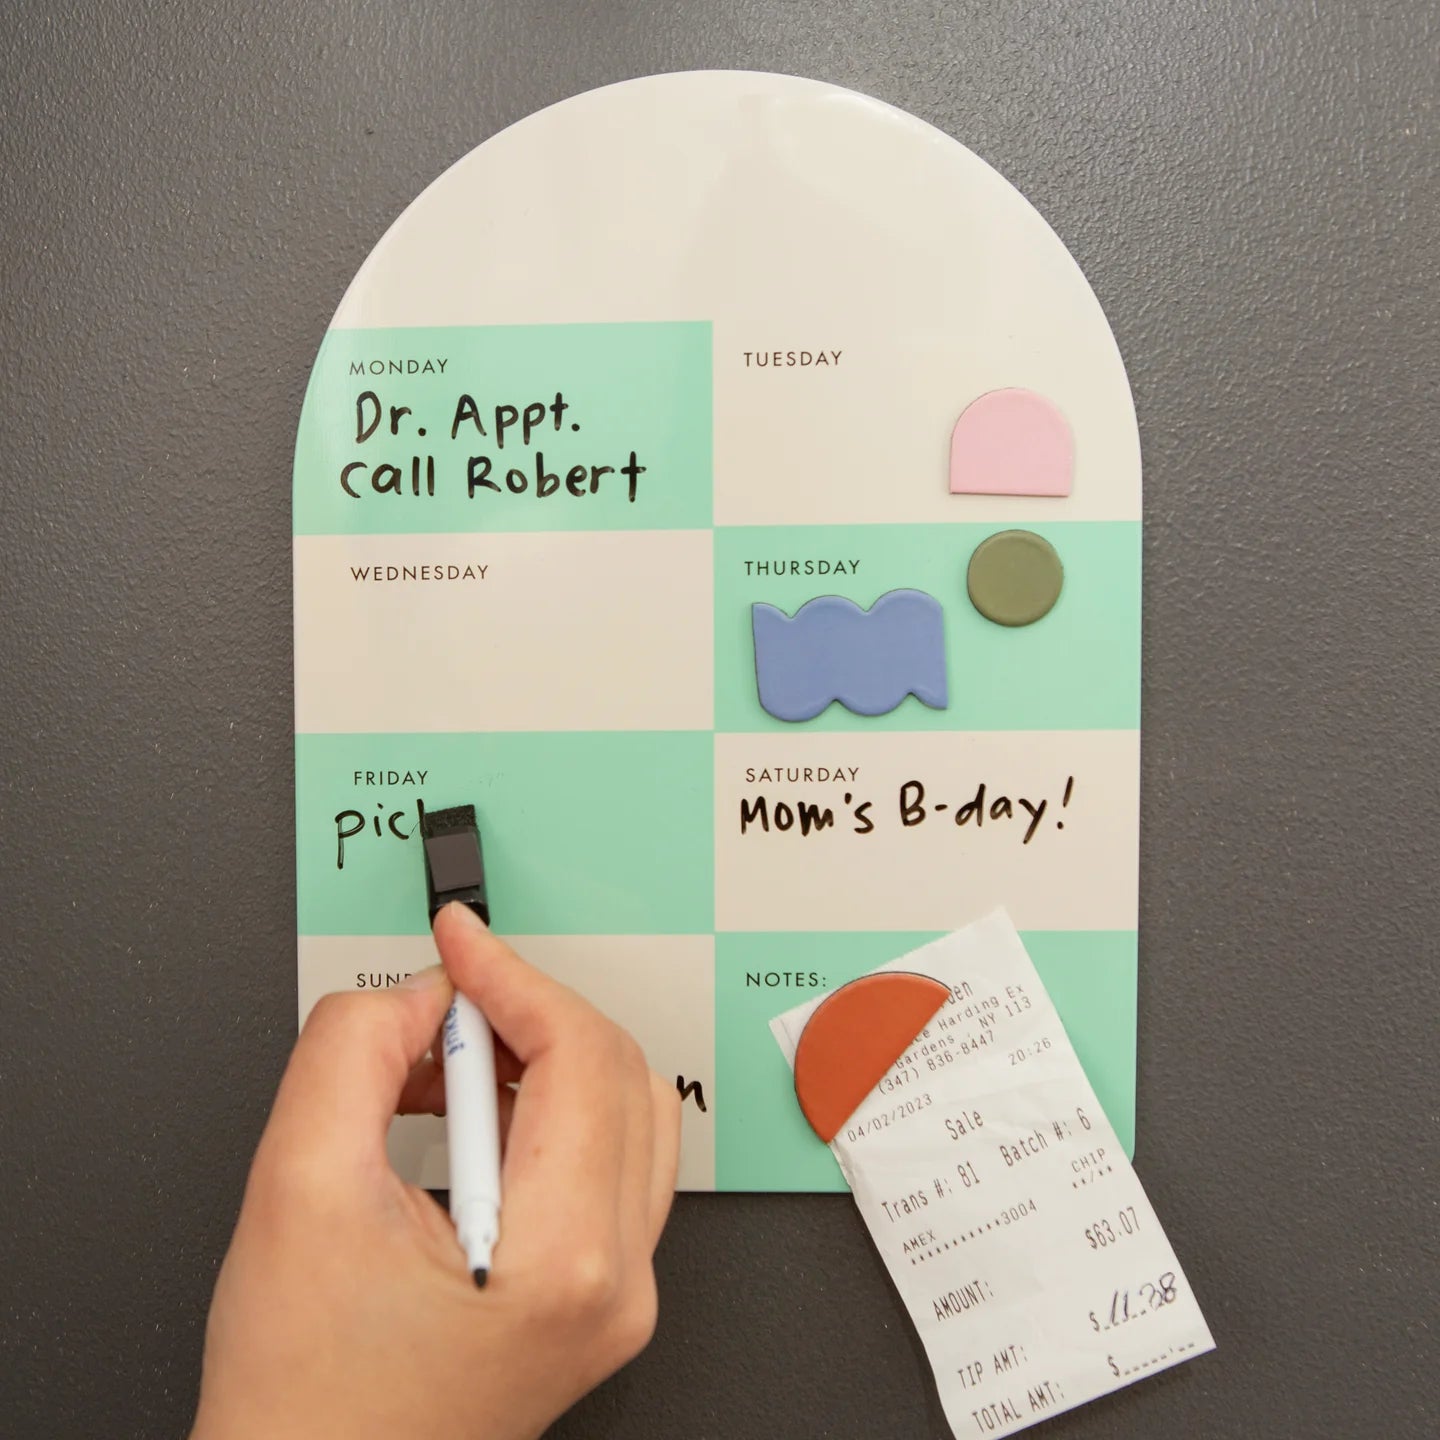 Fab Gifts | Kikkerland Magnetic Dry Erase Weekly Memo Board by Weirs of Baggot Street